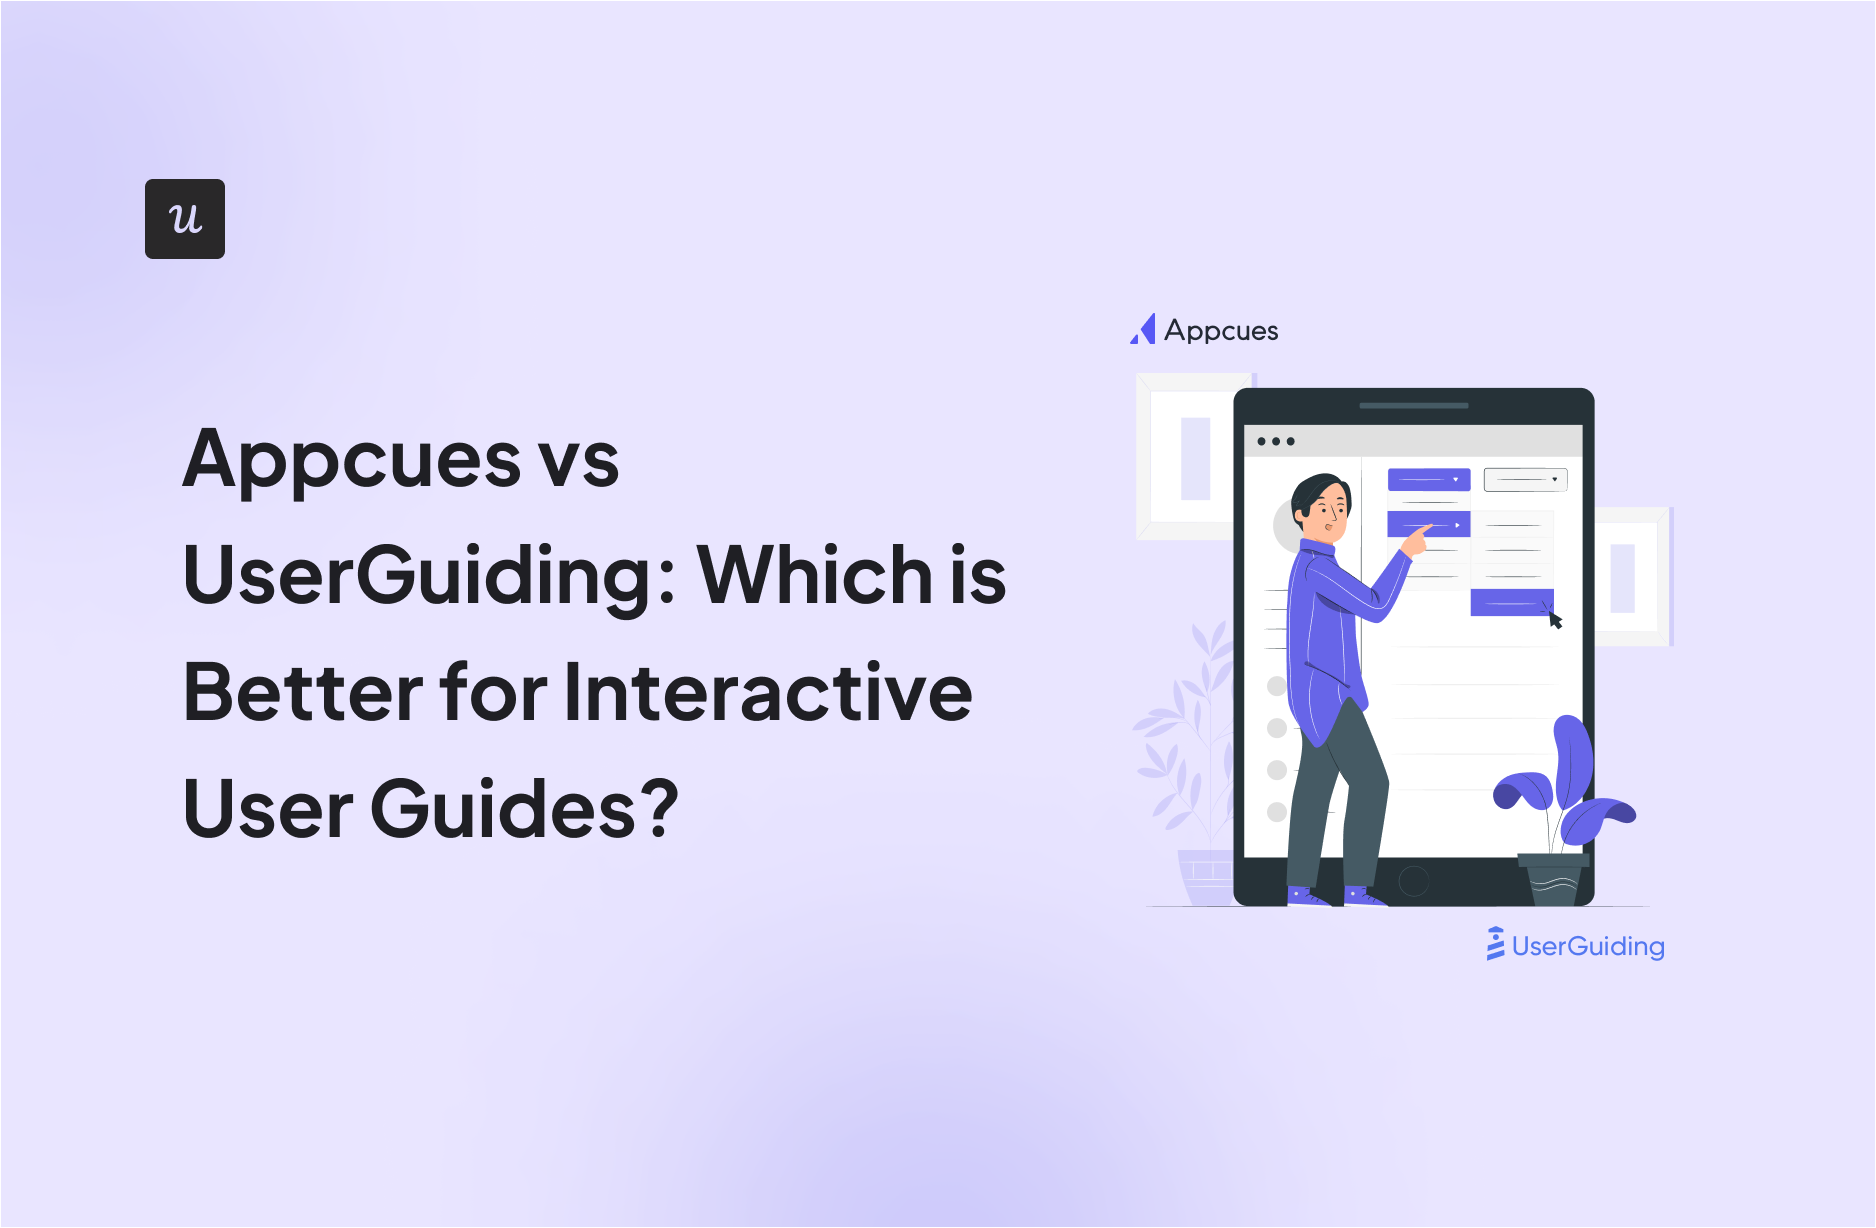 Appcues vs UserGuiding: Which is Better for Interactive User Guides?